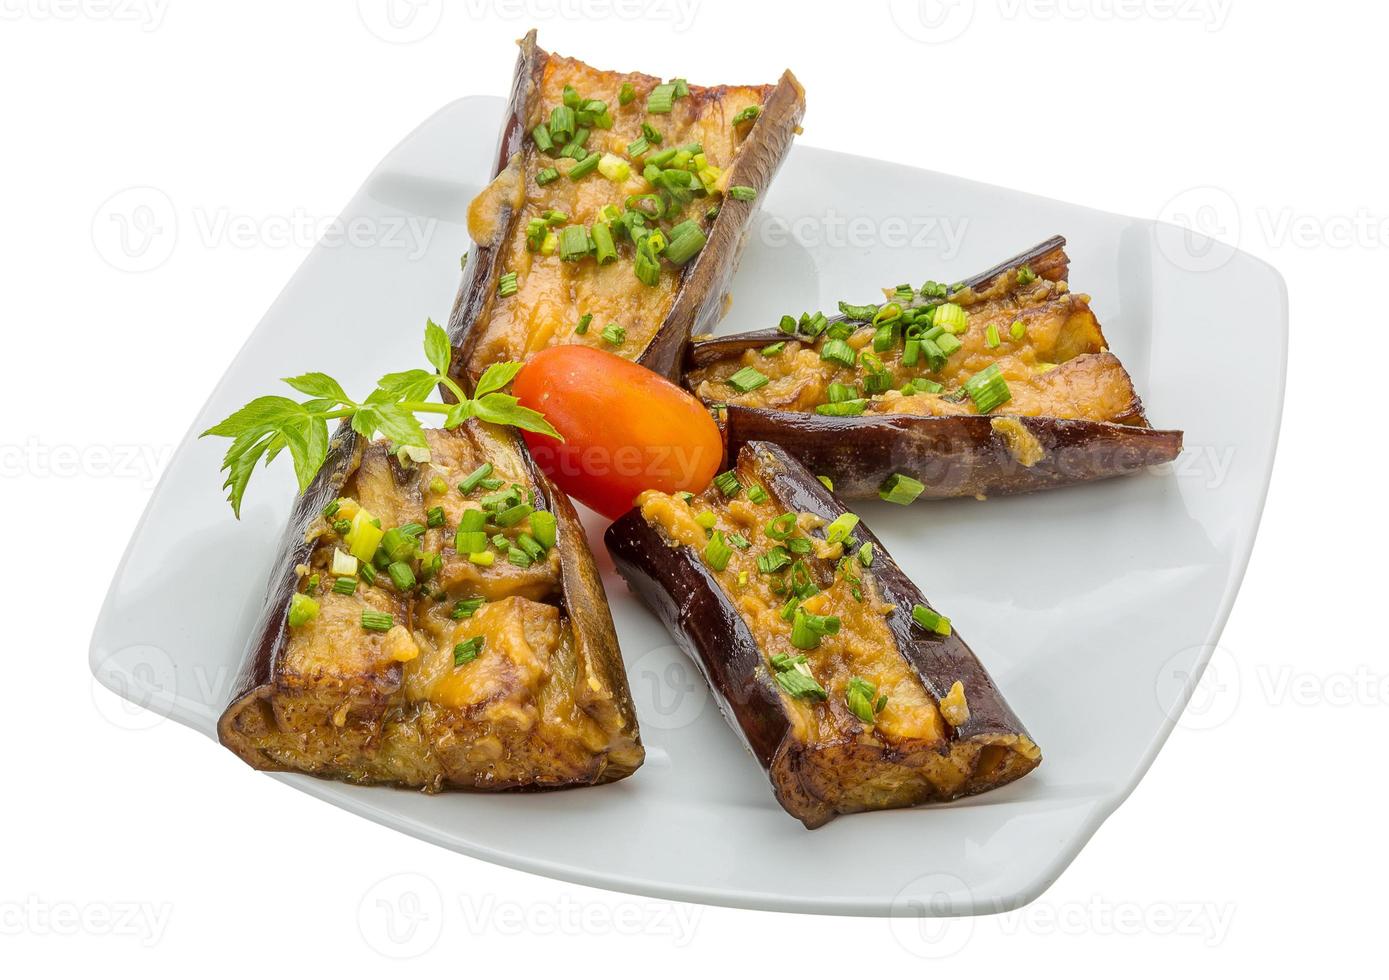 Grilled eggplant on the plate and white background photo